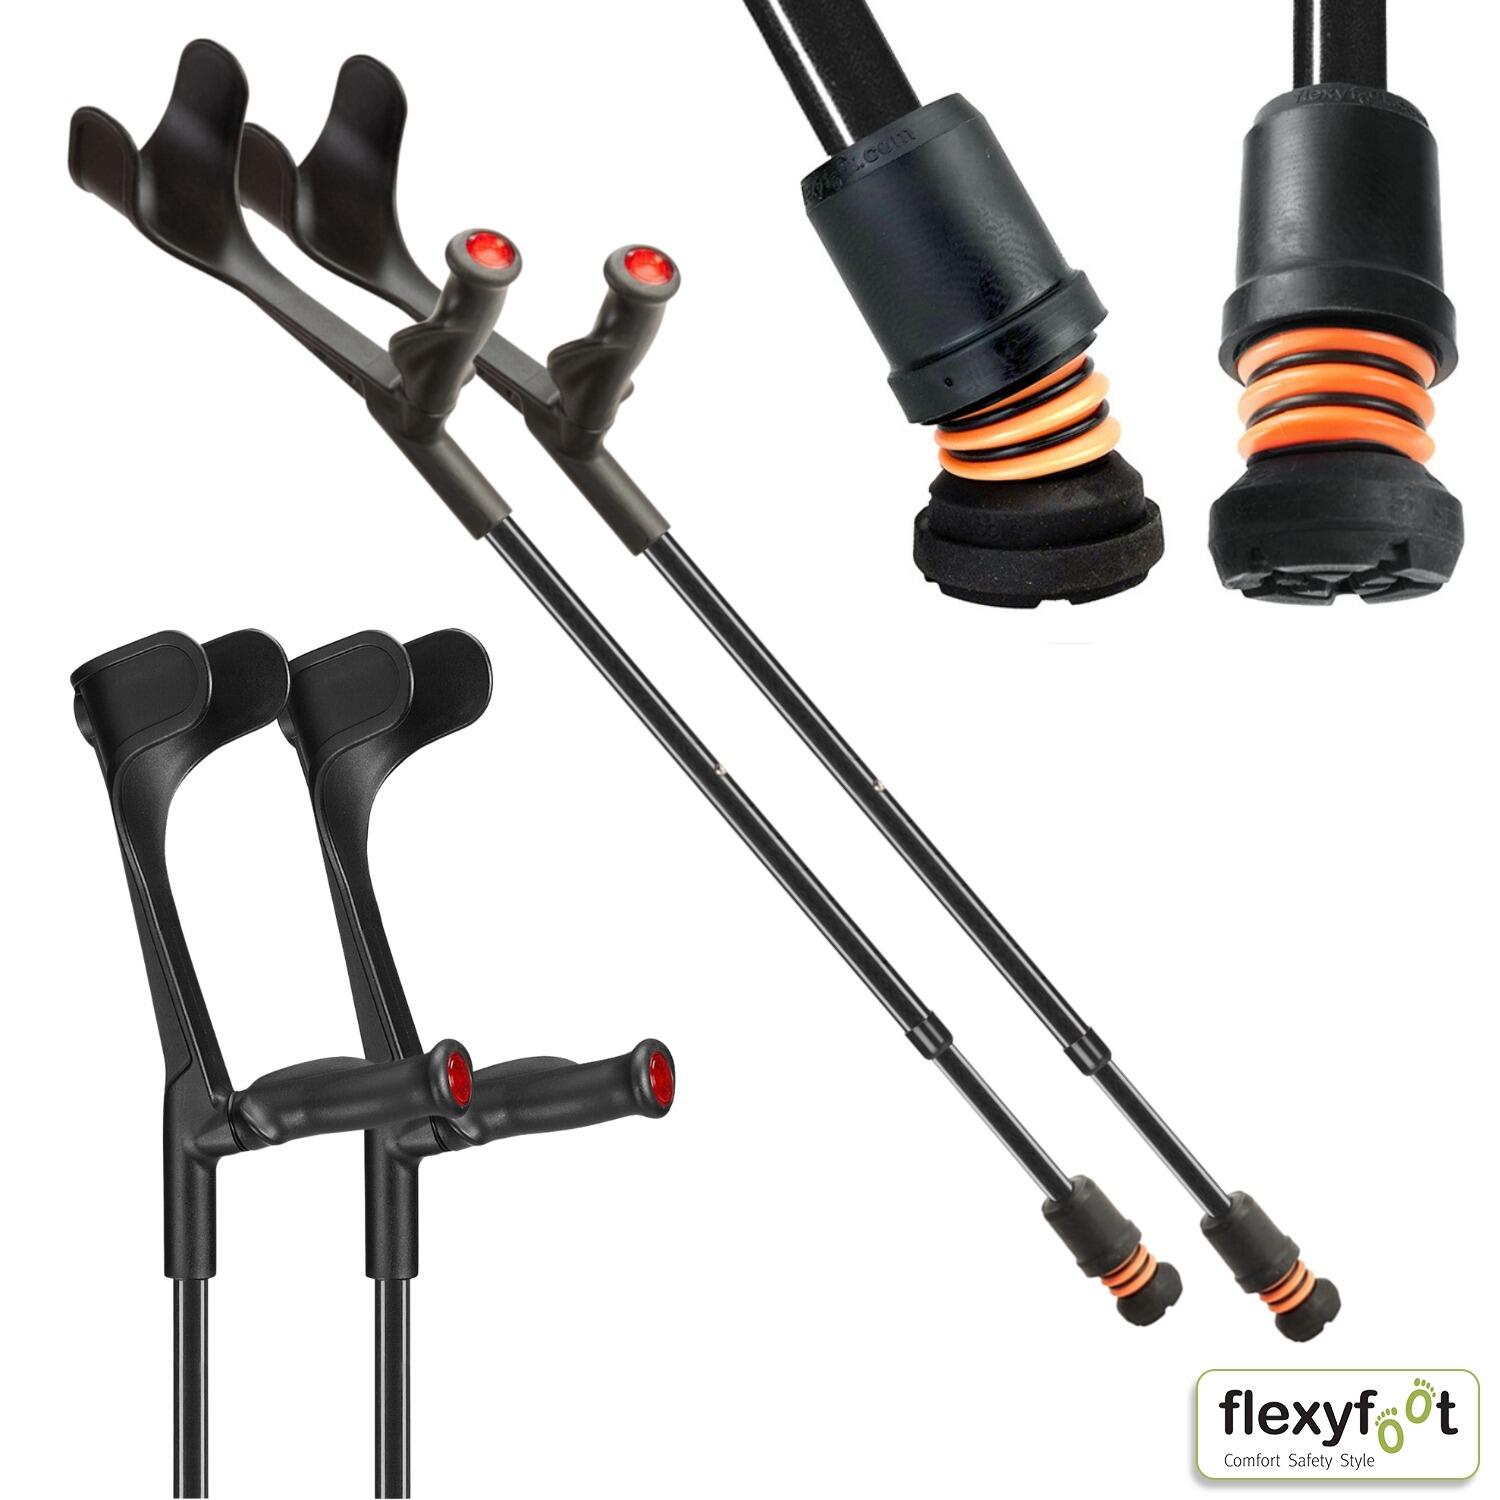 A pair of black Flexyfoot Comfort Grip Open Cuff Crutches